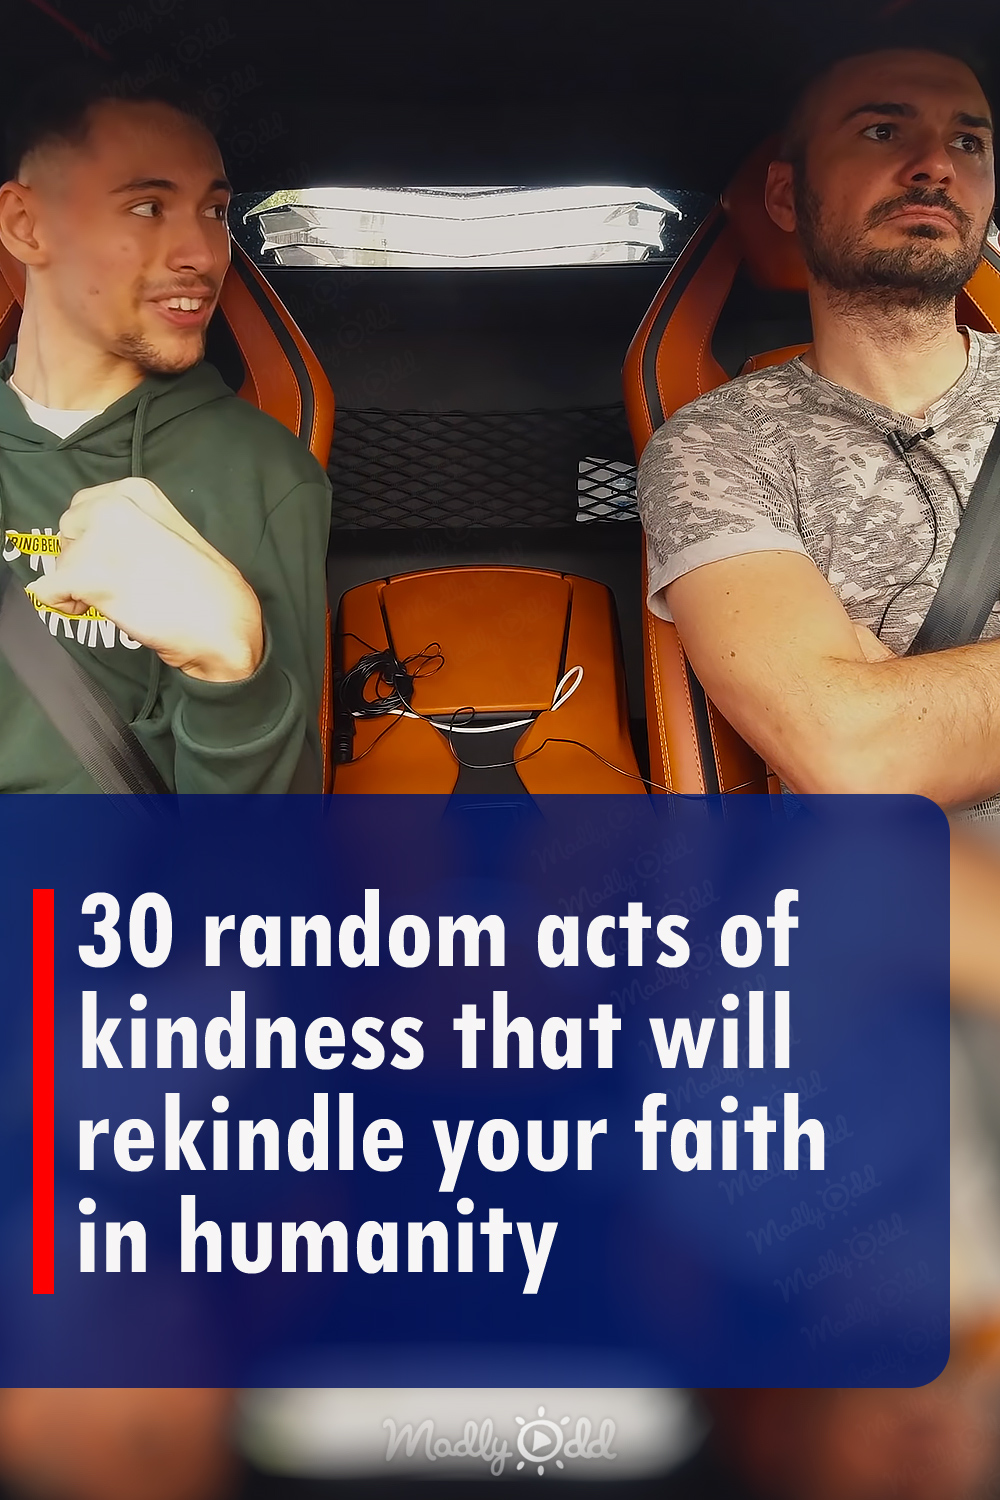 30 random acts of kindness that will rekindle your faith in humanity